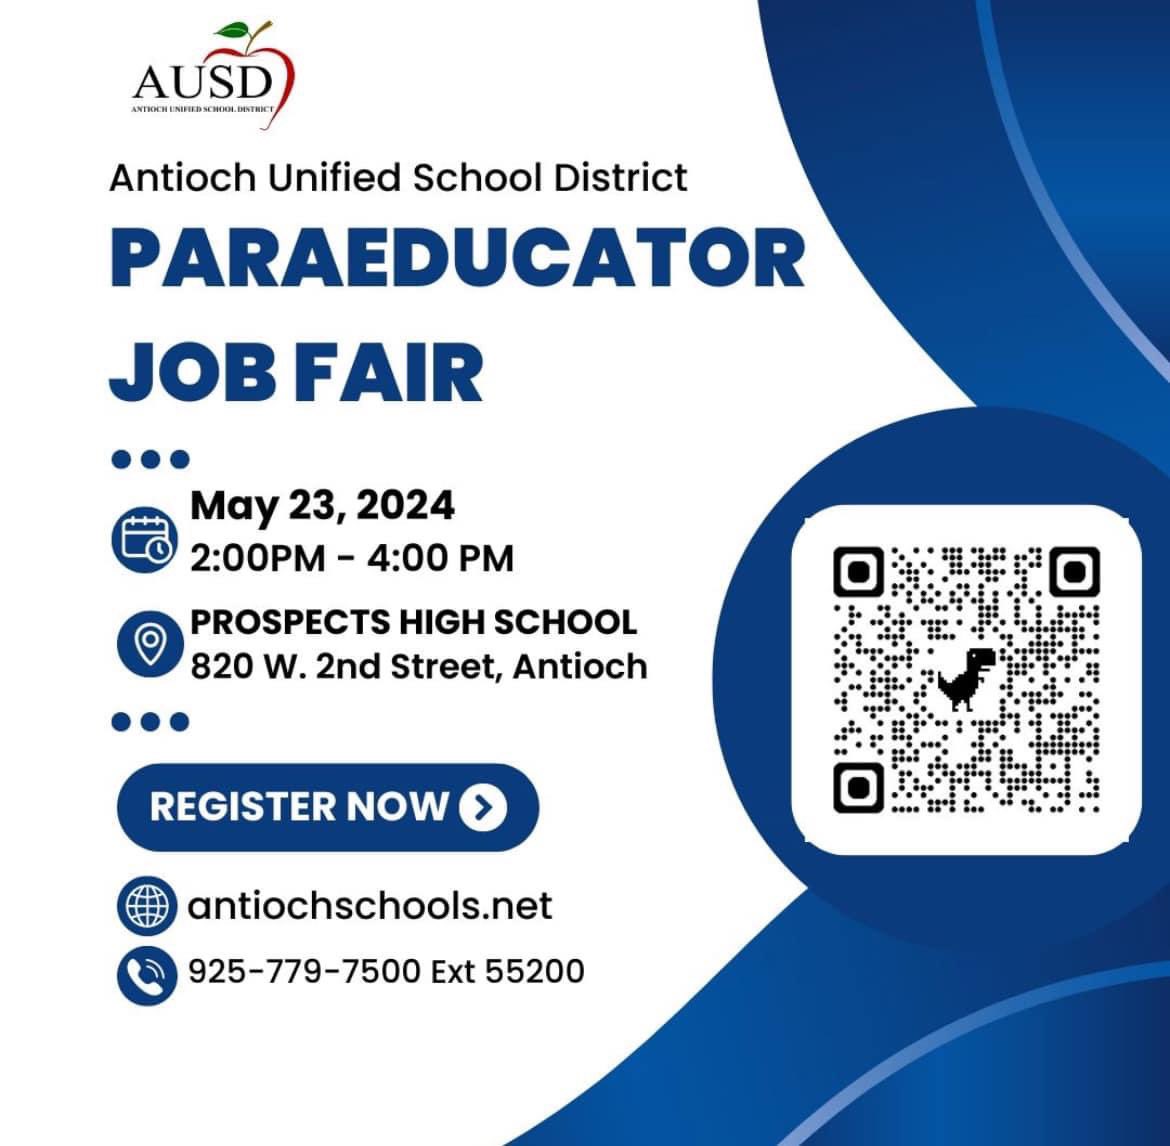 We are holding a recruitment fair for Paraeducators in the Antioch Unified School District May 23, 2024 at Prospects High School. Our Paraeducators are well paid, provided exceptional benefits and are well-respected across the District! Check out our positions & apply!